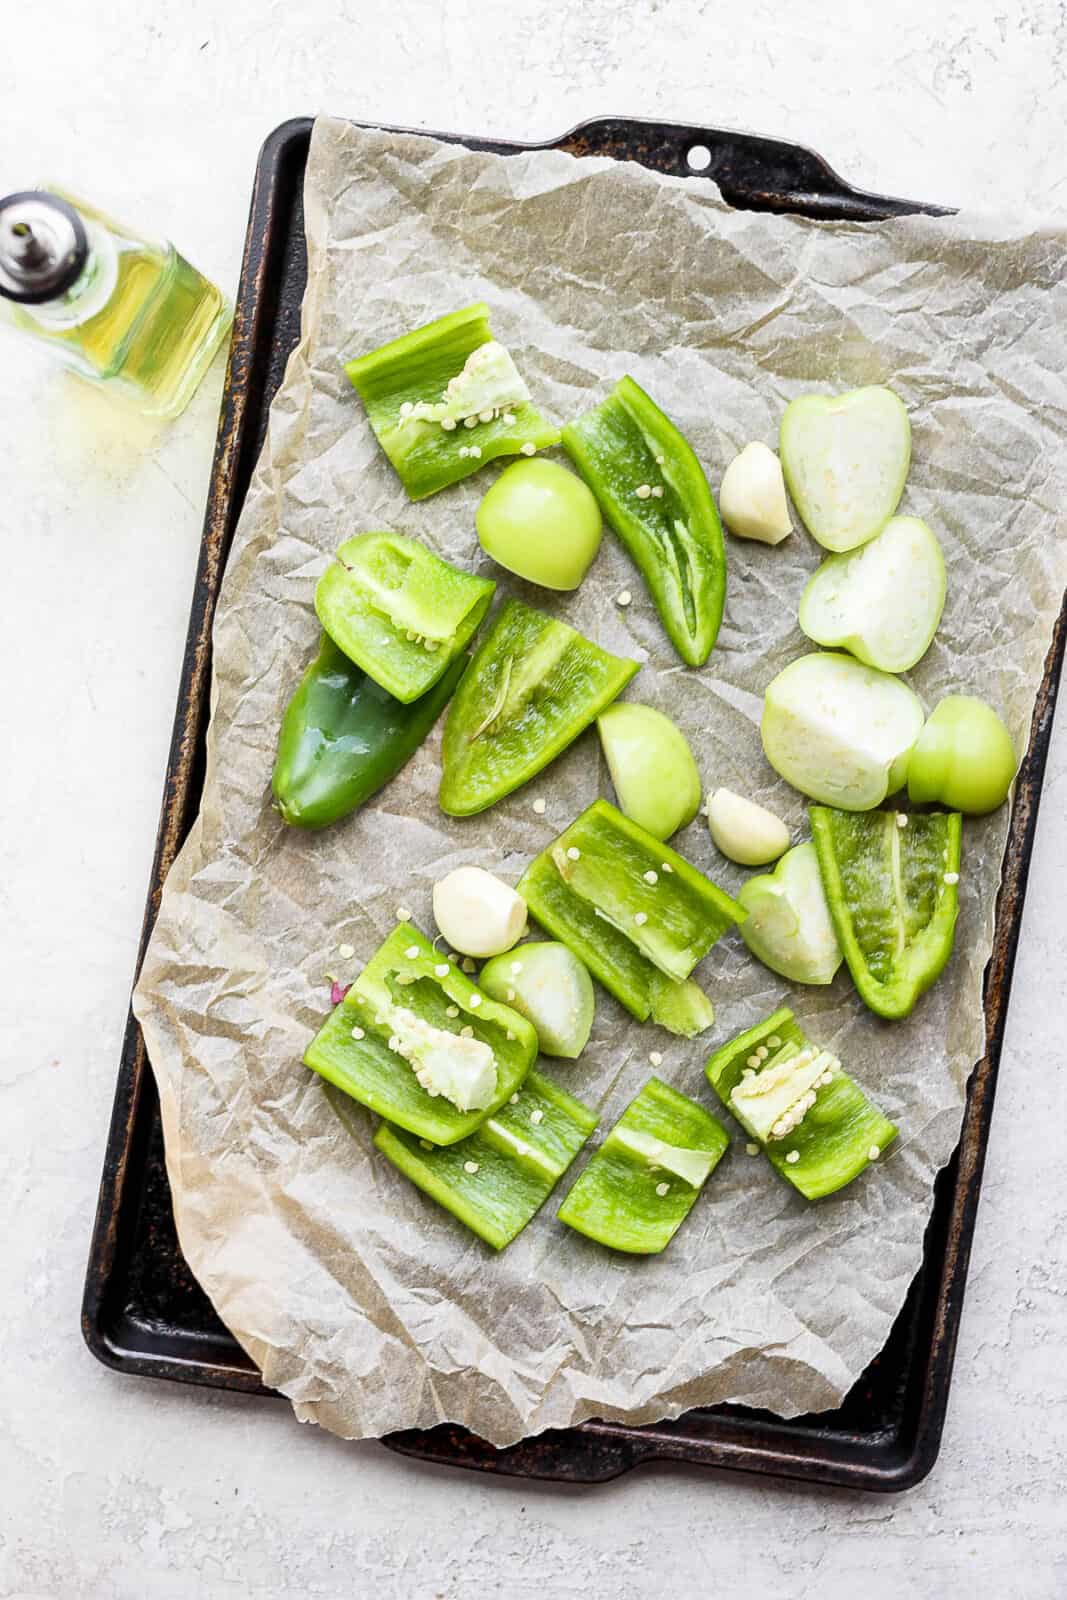 Tomatillos, anaheim pepper, jalapeno, garlic, and onion on a parchment-lined pan with olive oil next to it.